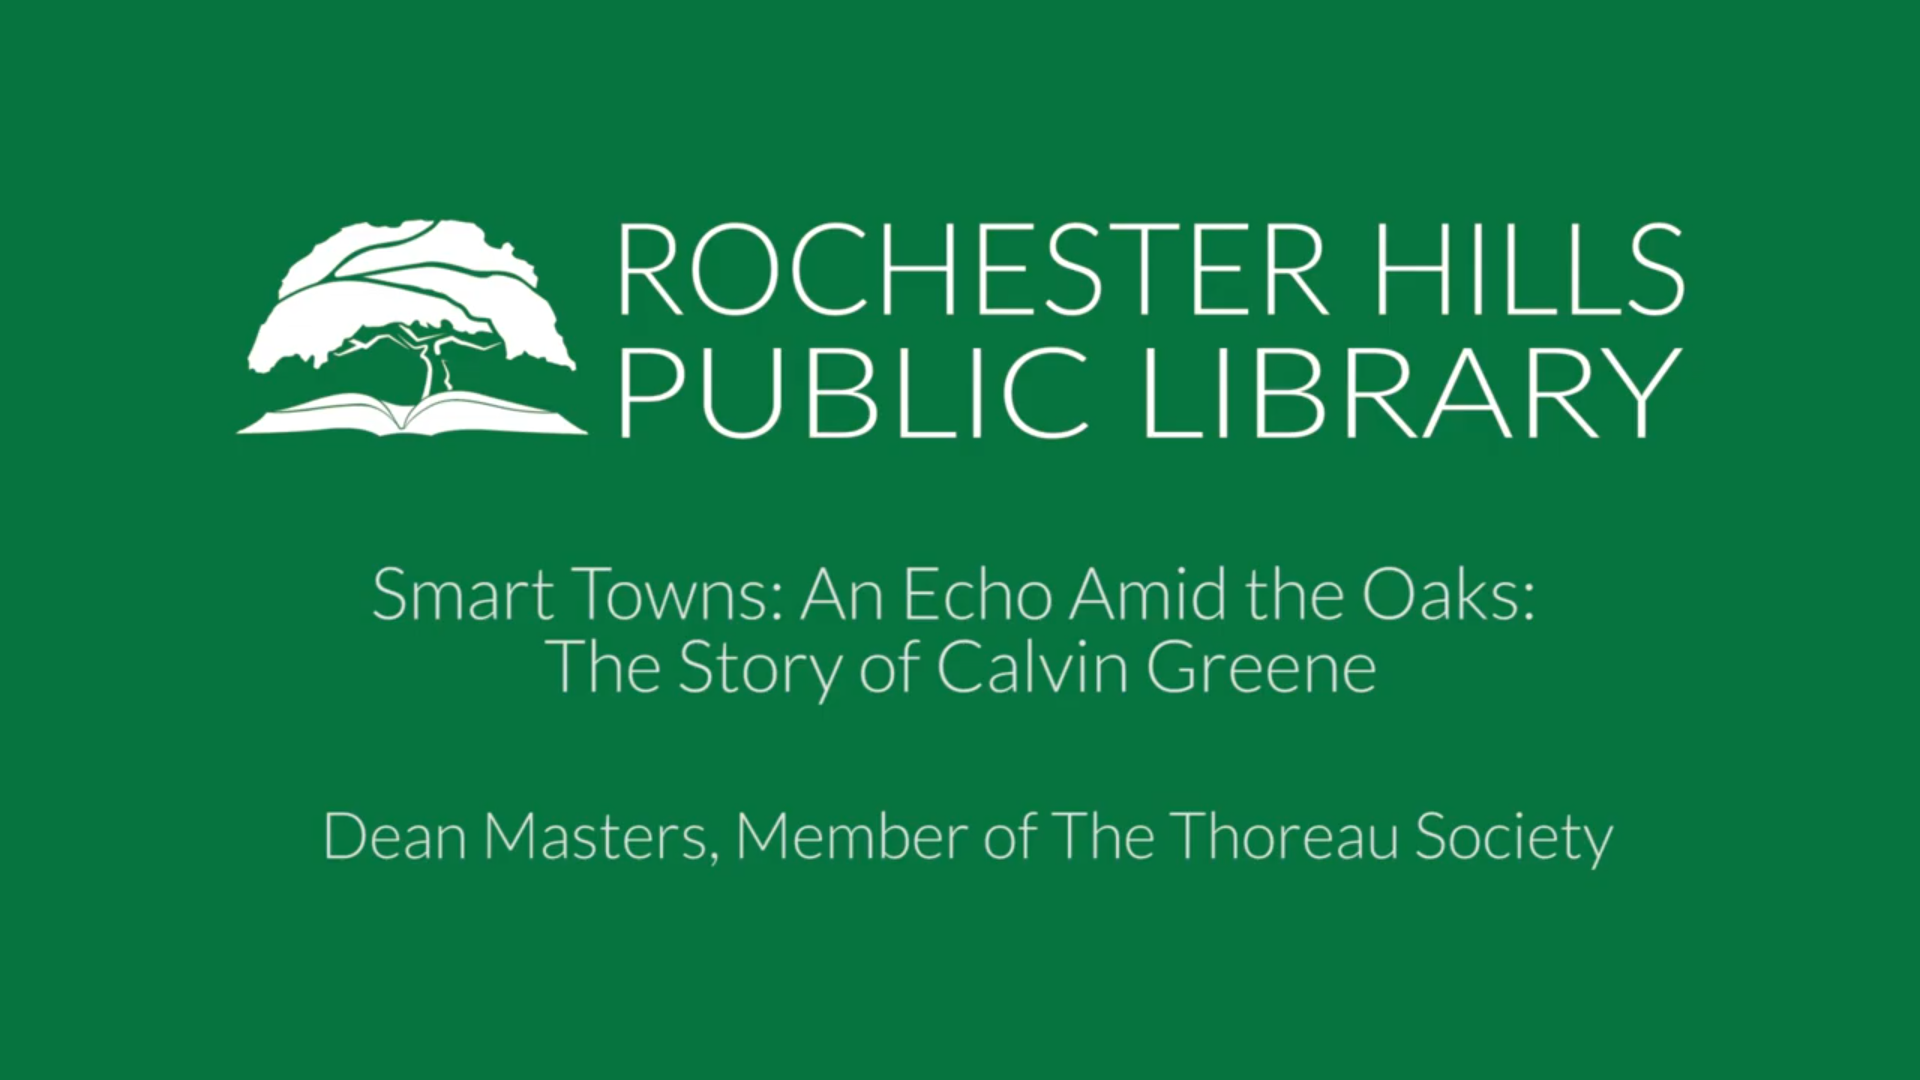 Smart Towns: An Echo Amid the Oaks: The Story of Calvin Greene